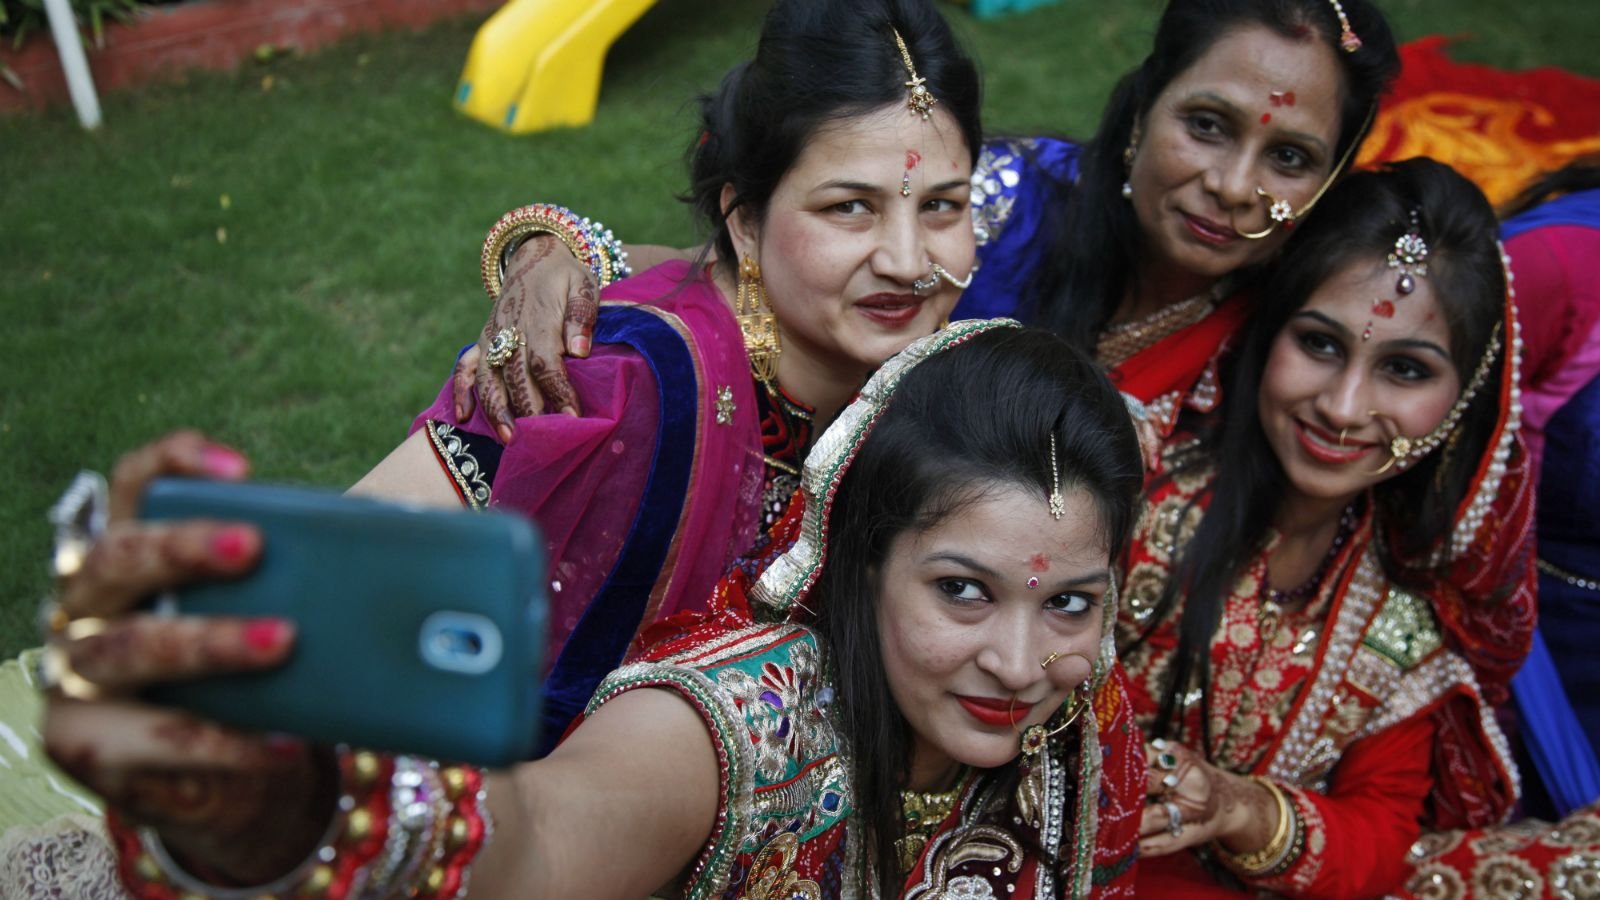 India Passes U.S. to Become World’s Second Biggest Smartphone Market